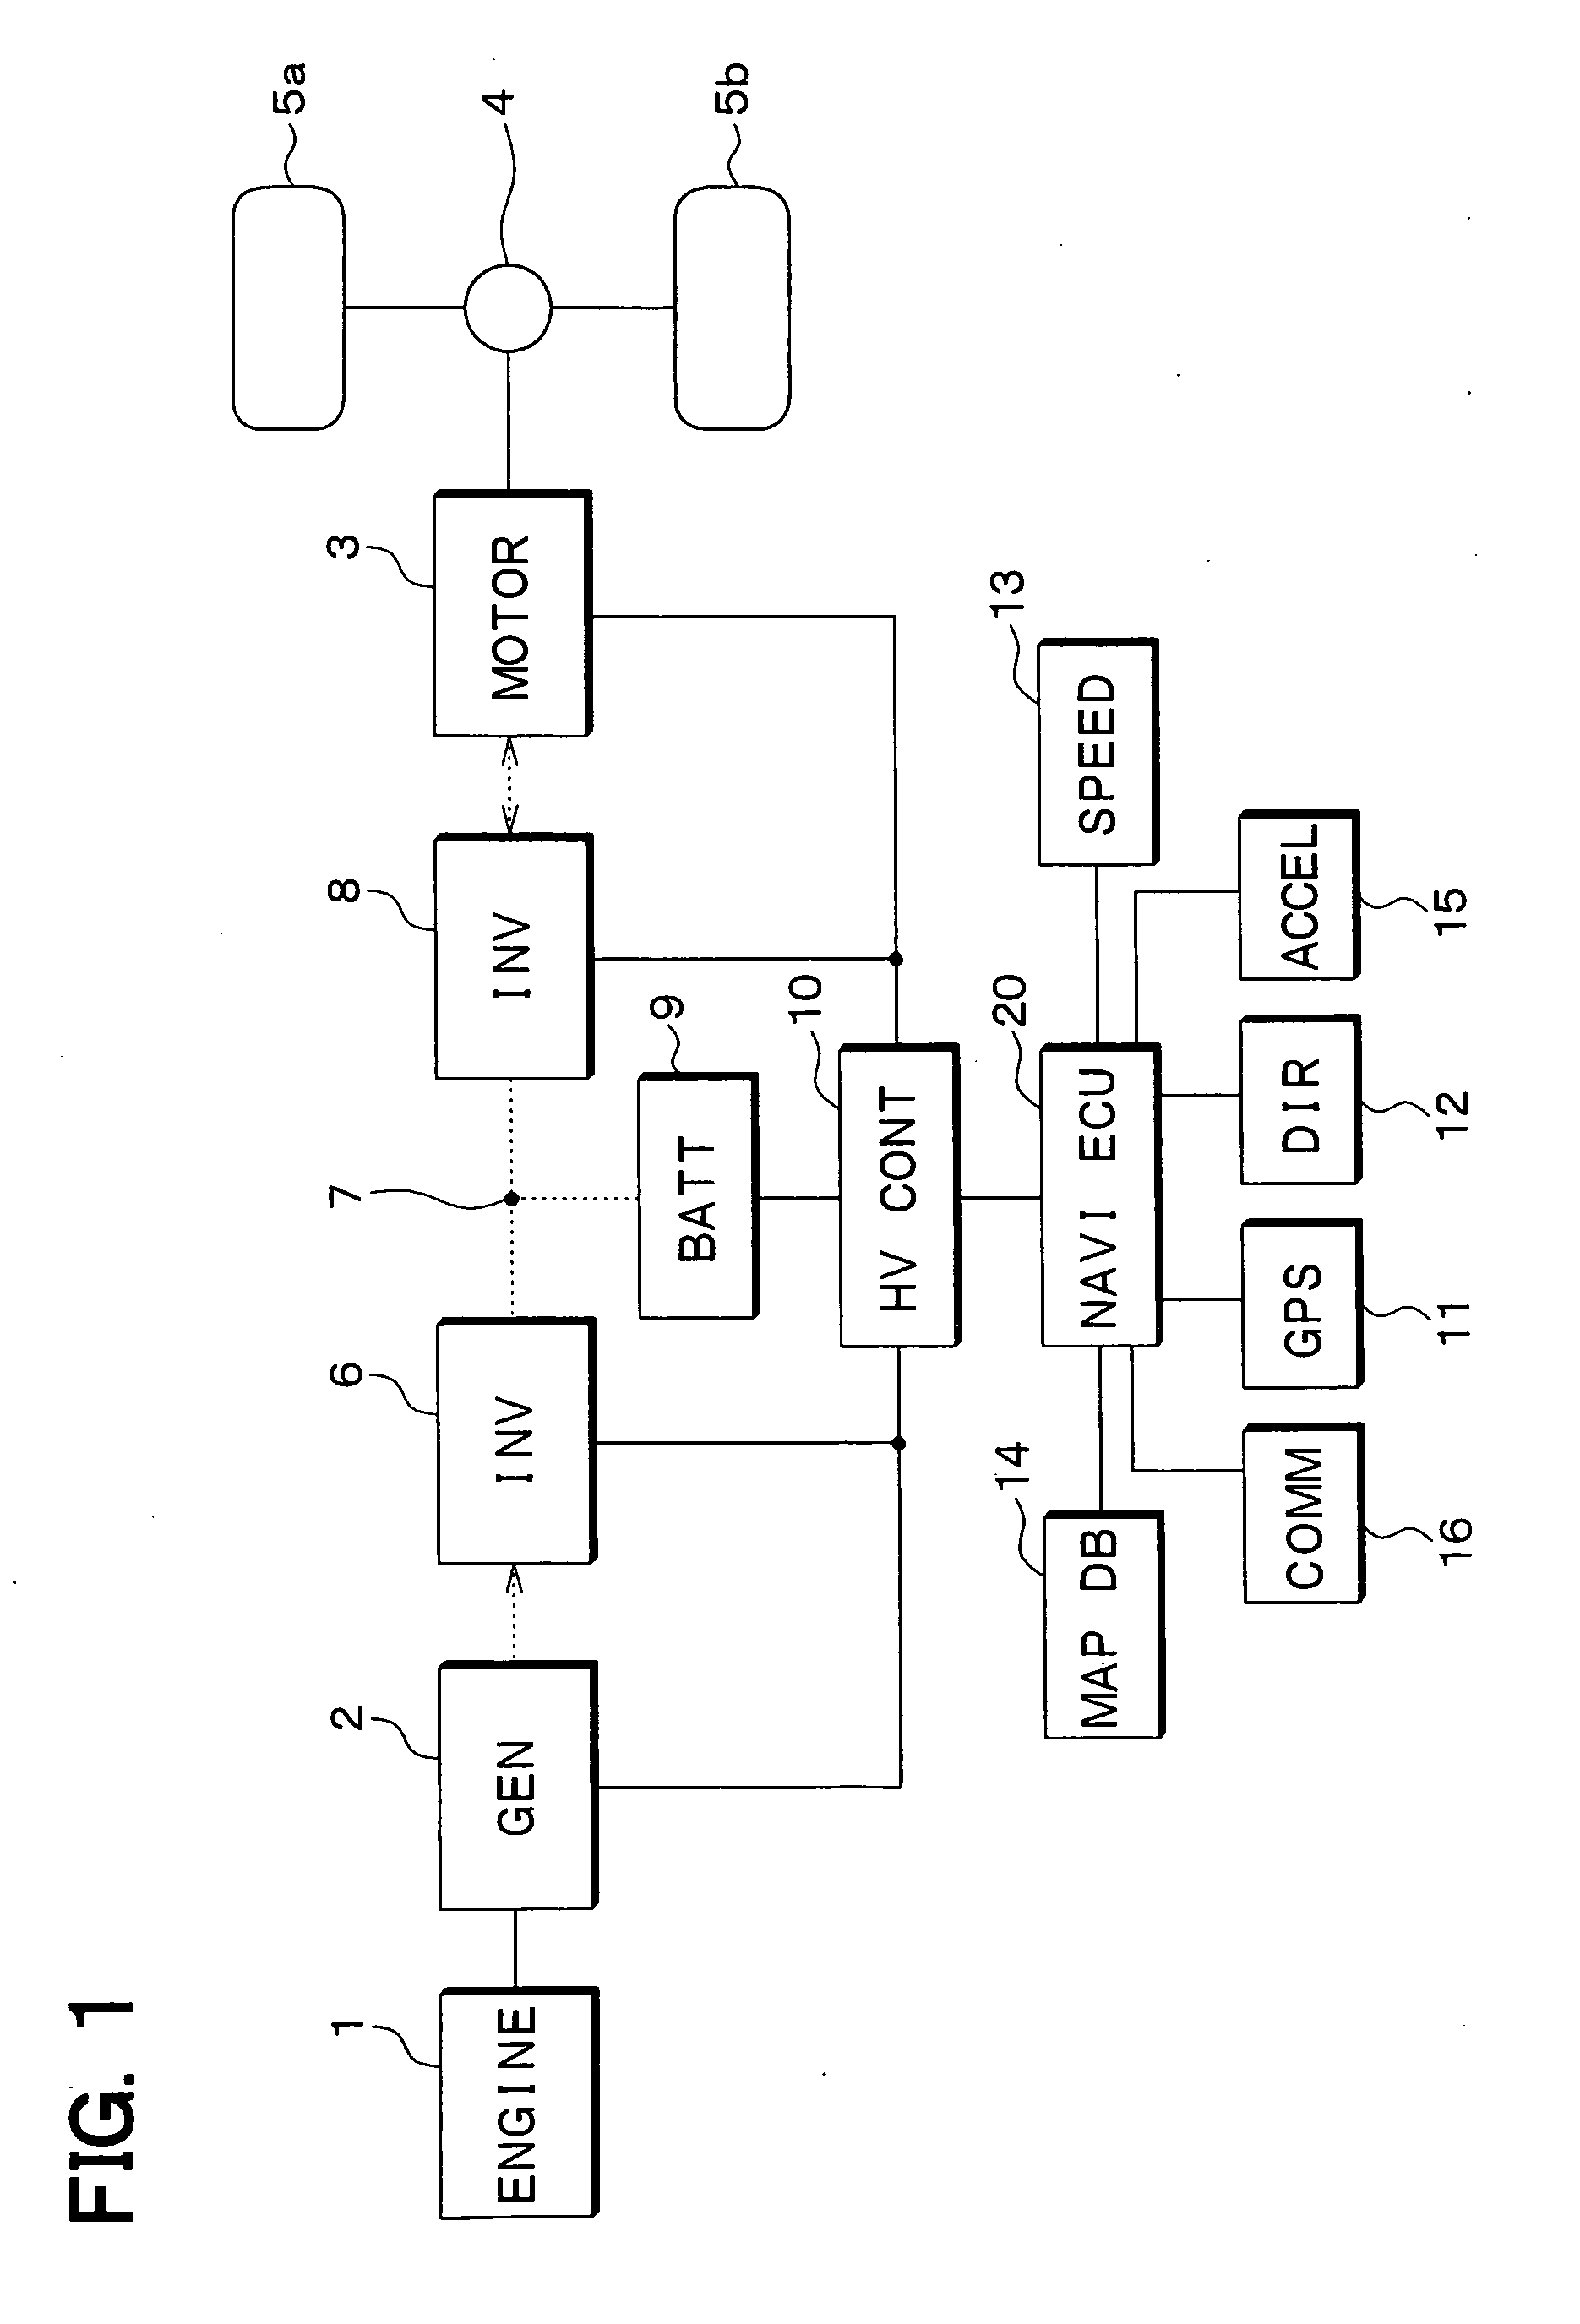 Charge planning apparatus